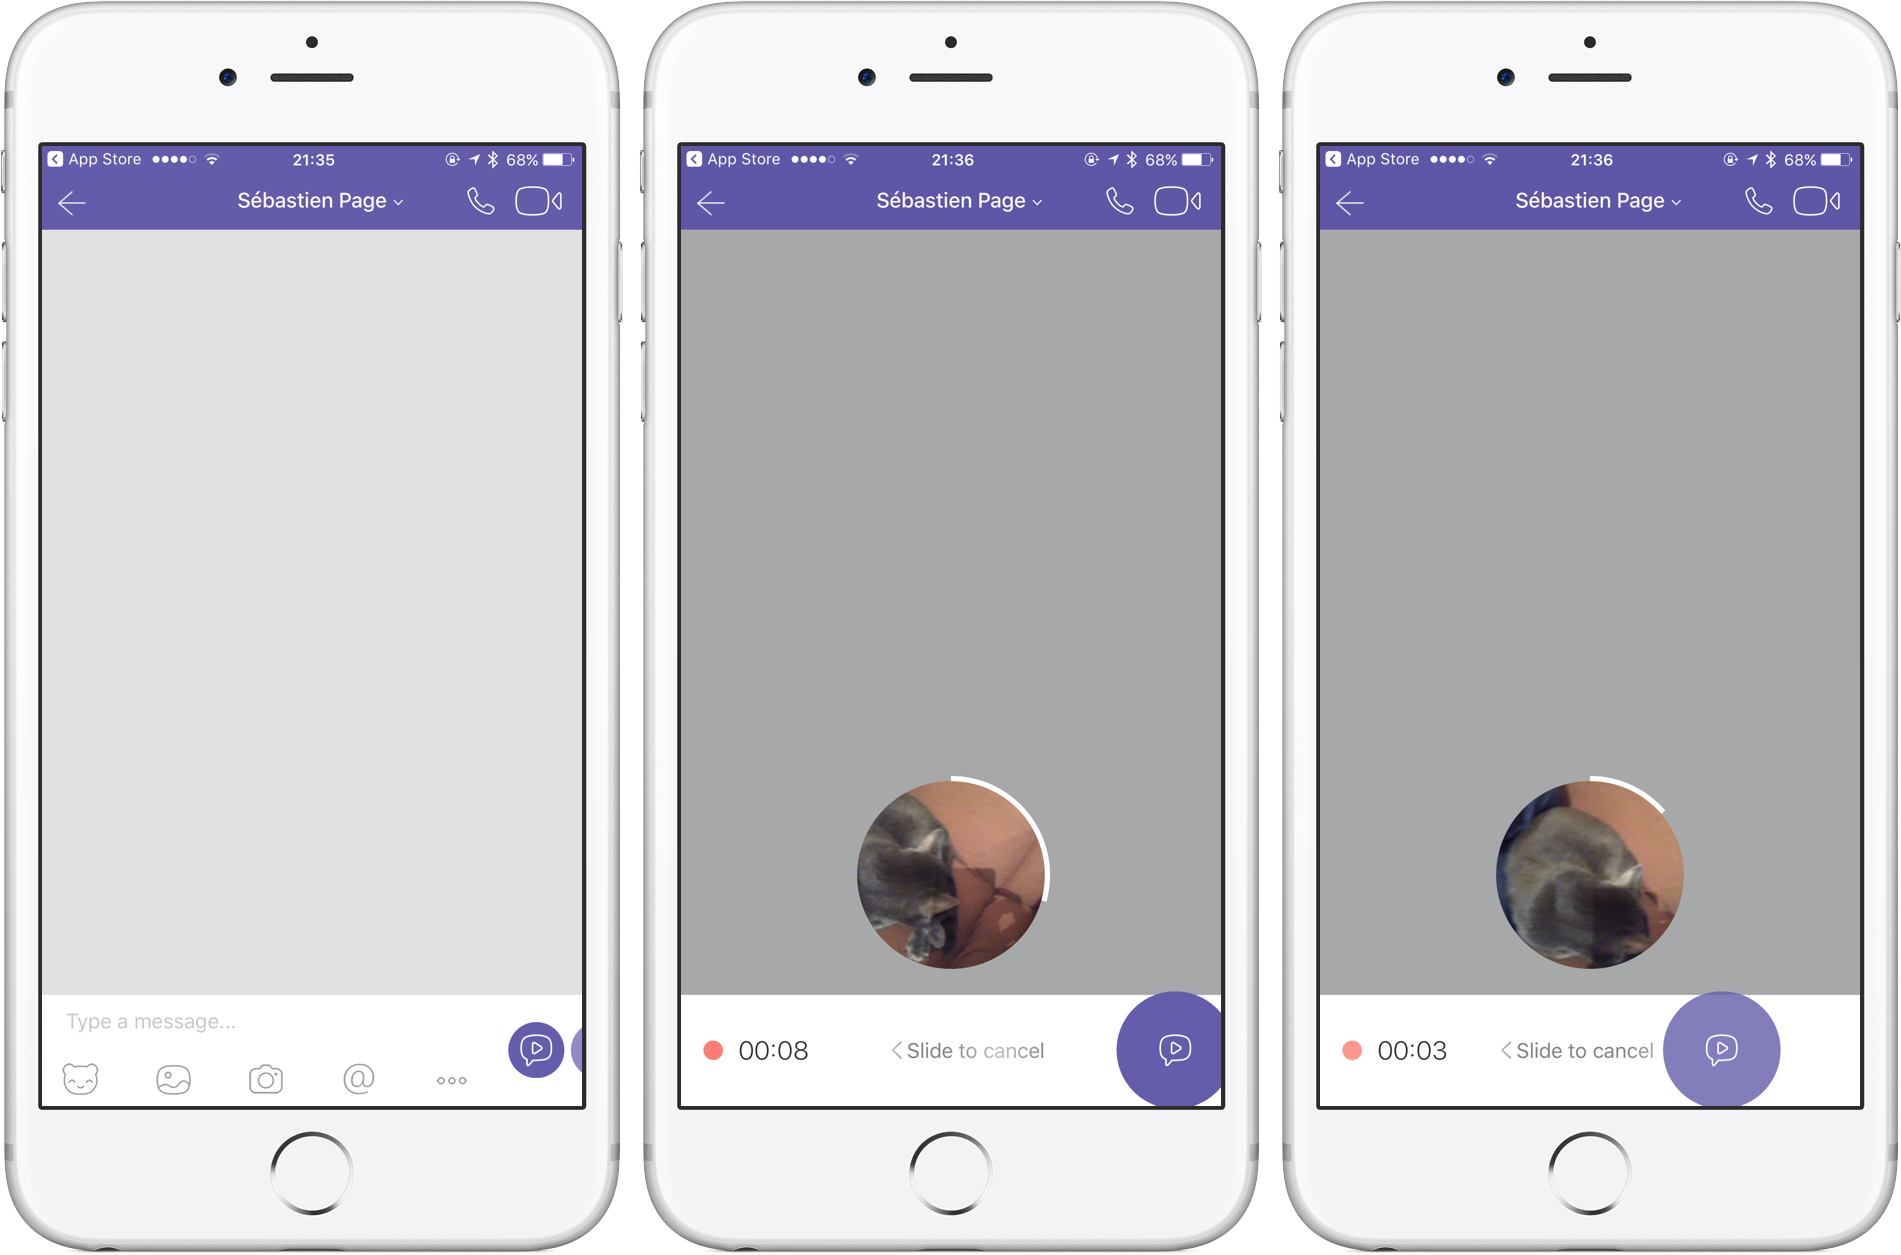 Viber 6.5.5 for iOS Instant Video Messages iPhone screenshot 001